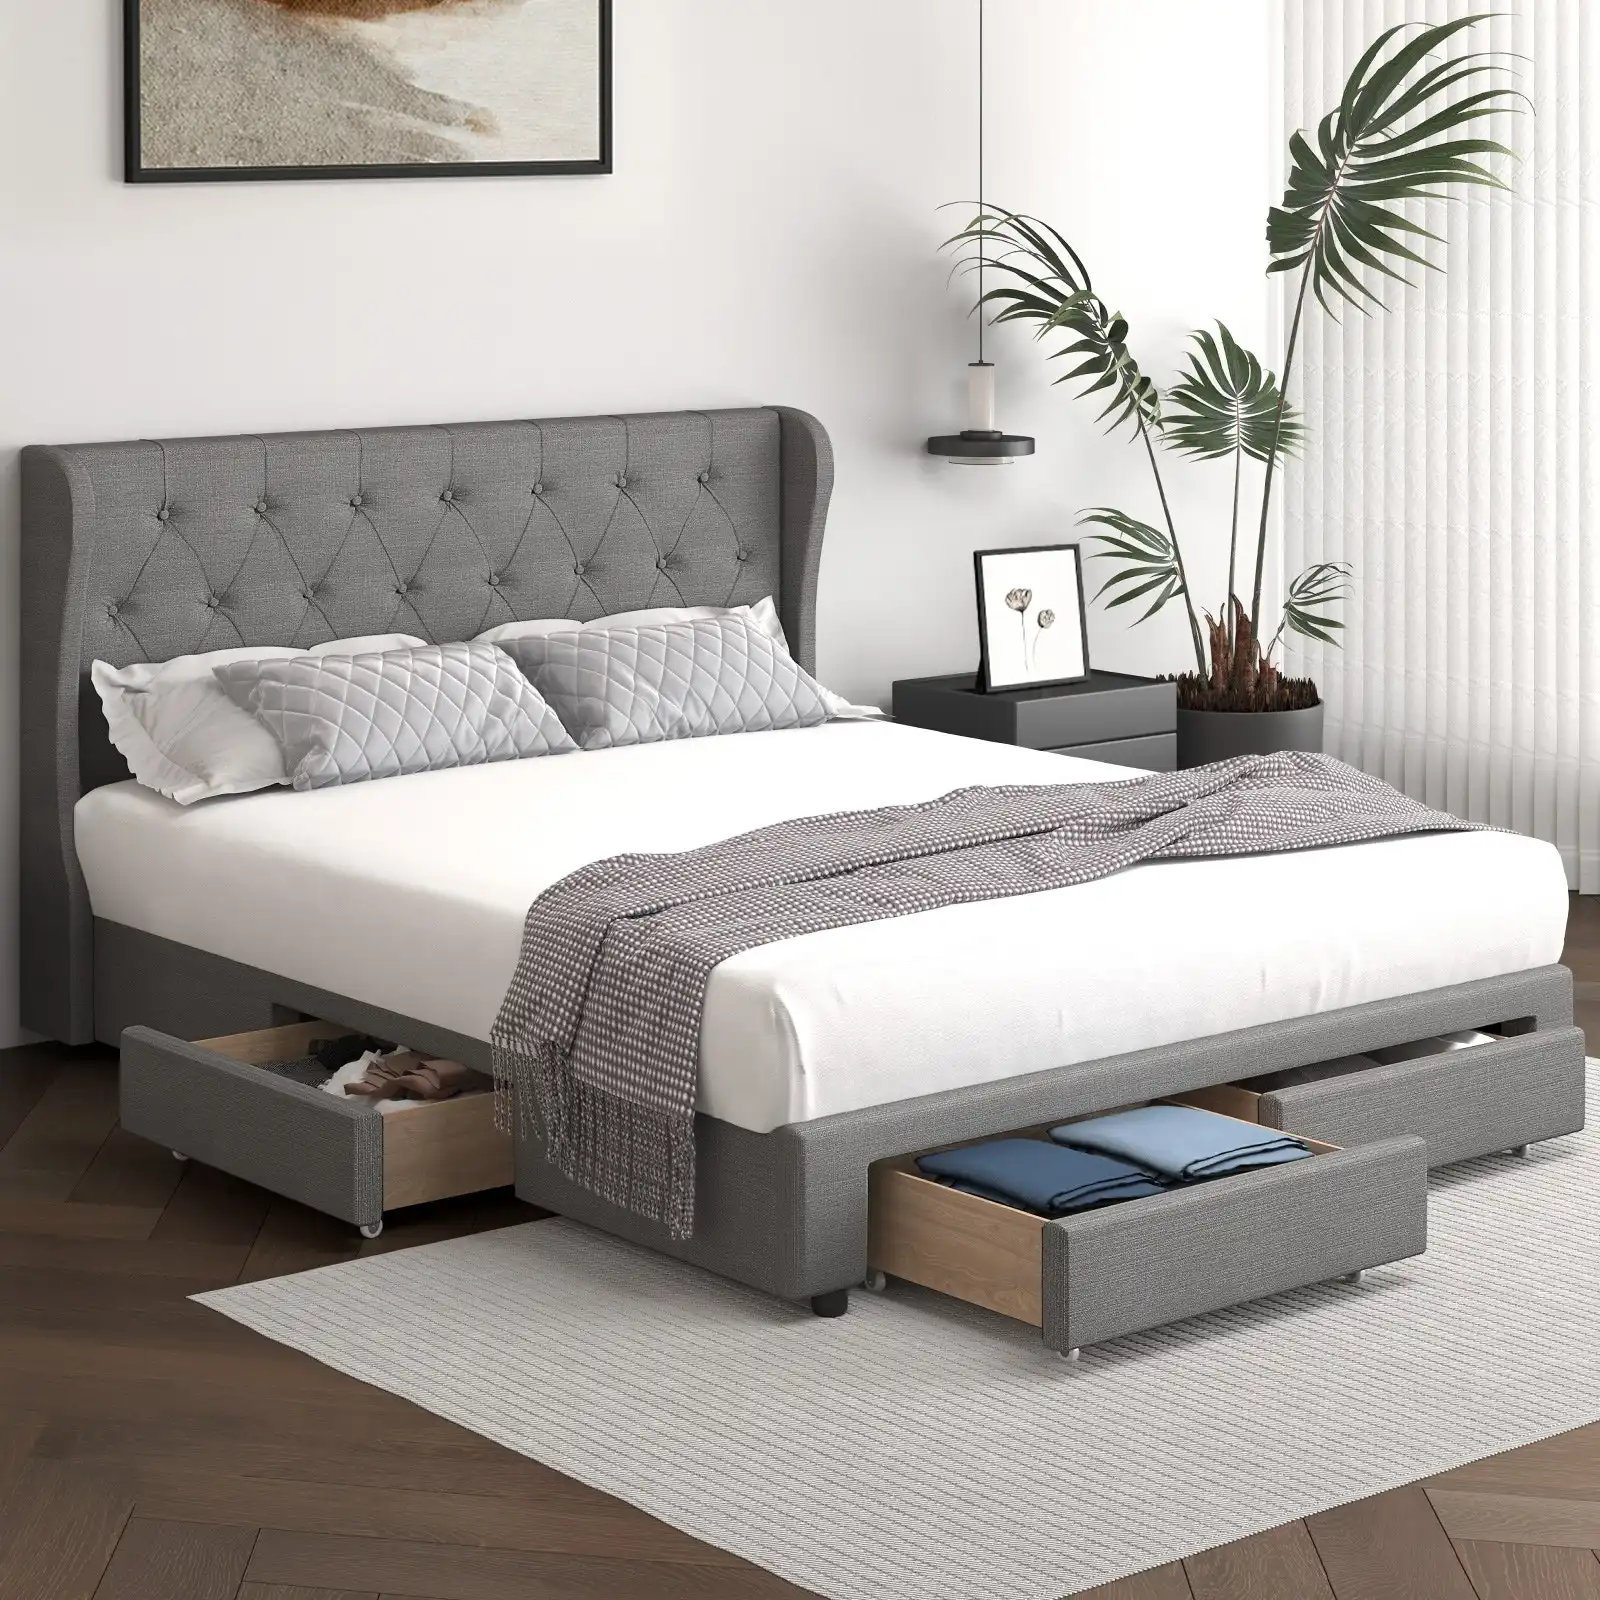 Oikiture Bed Frame King Size Base With 4 Storage Drawers